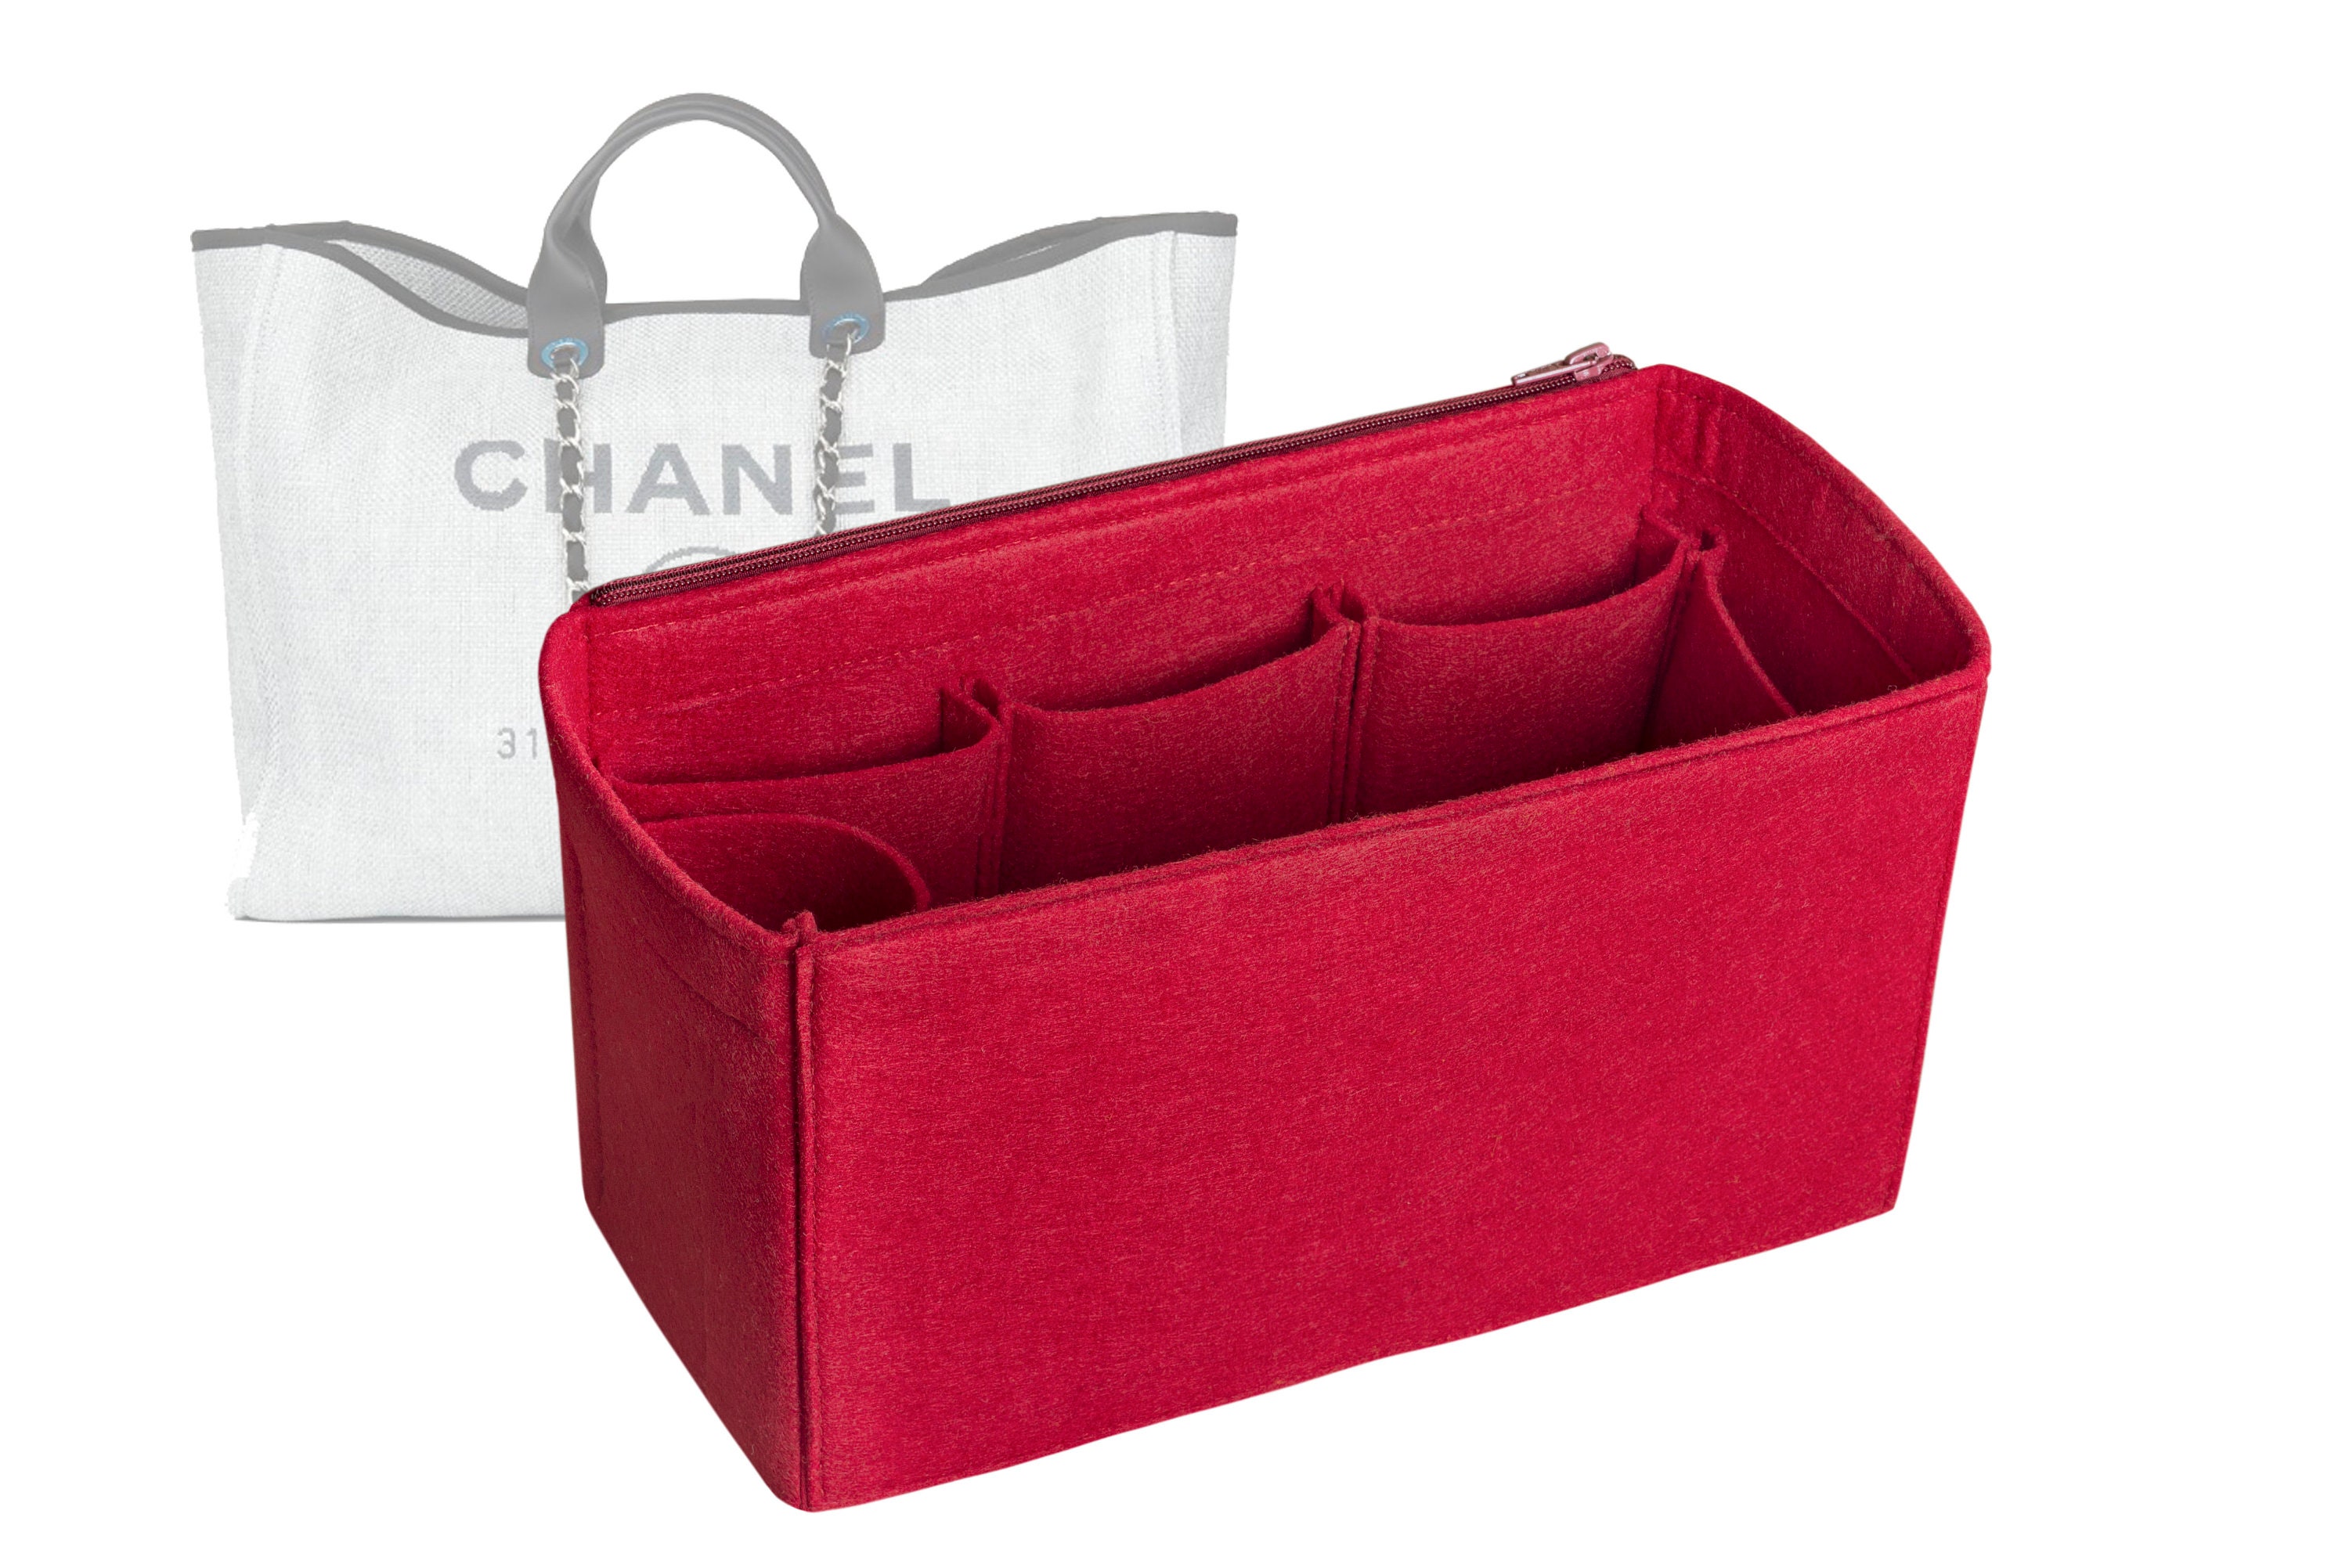 Chanel Deauville Canvas Tote Organizer Insert, Bag Organizer with Laptop  Compartment and Pen Holder